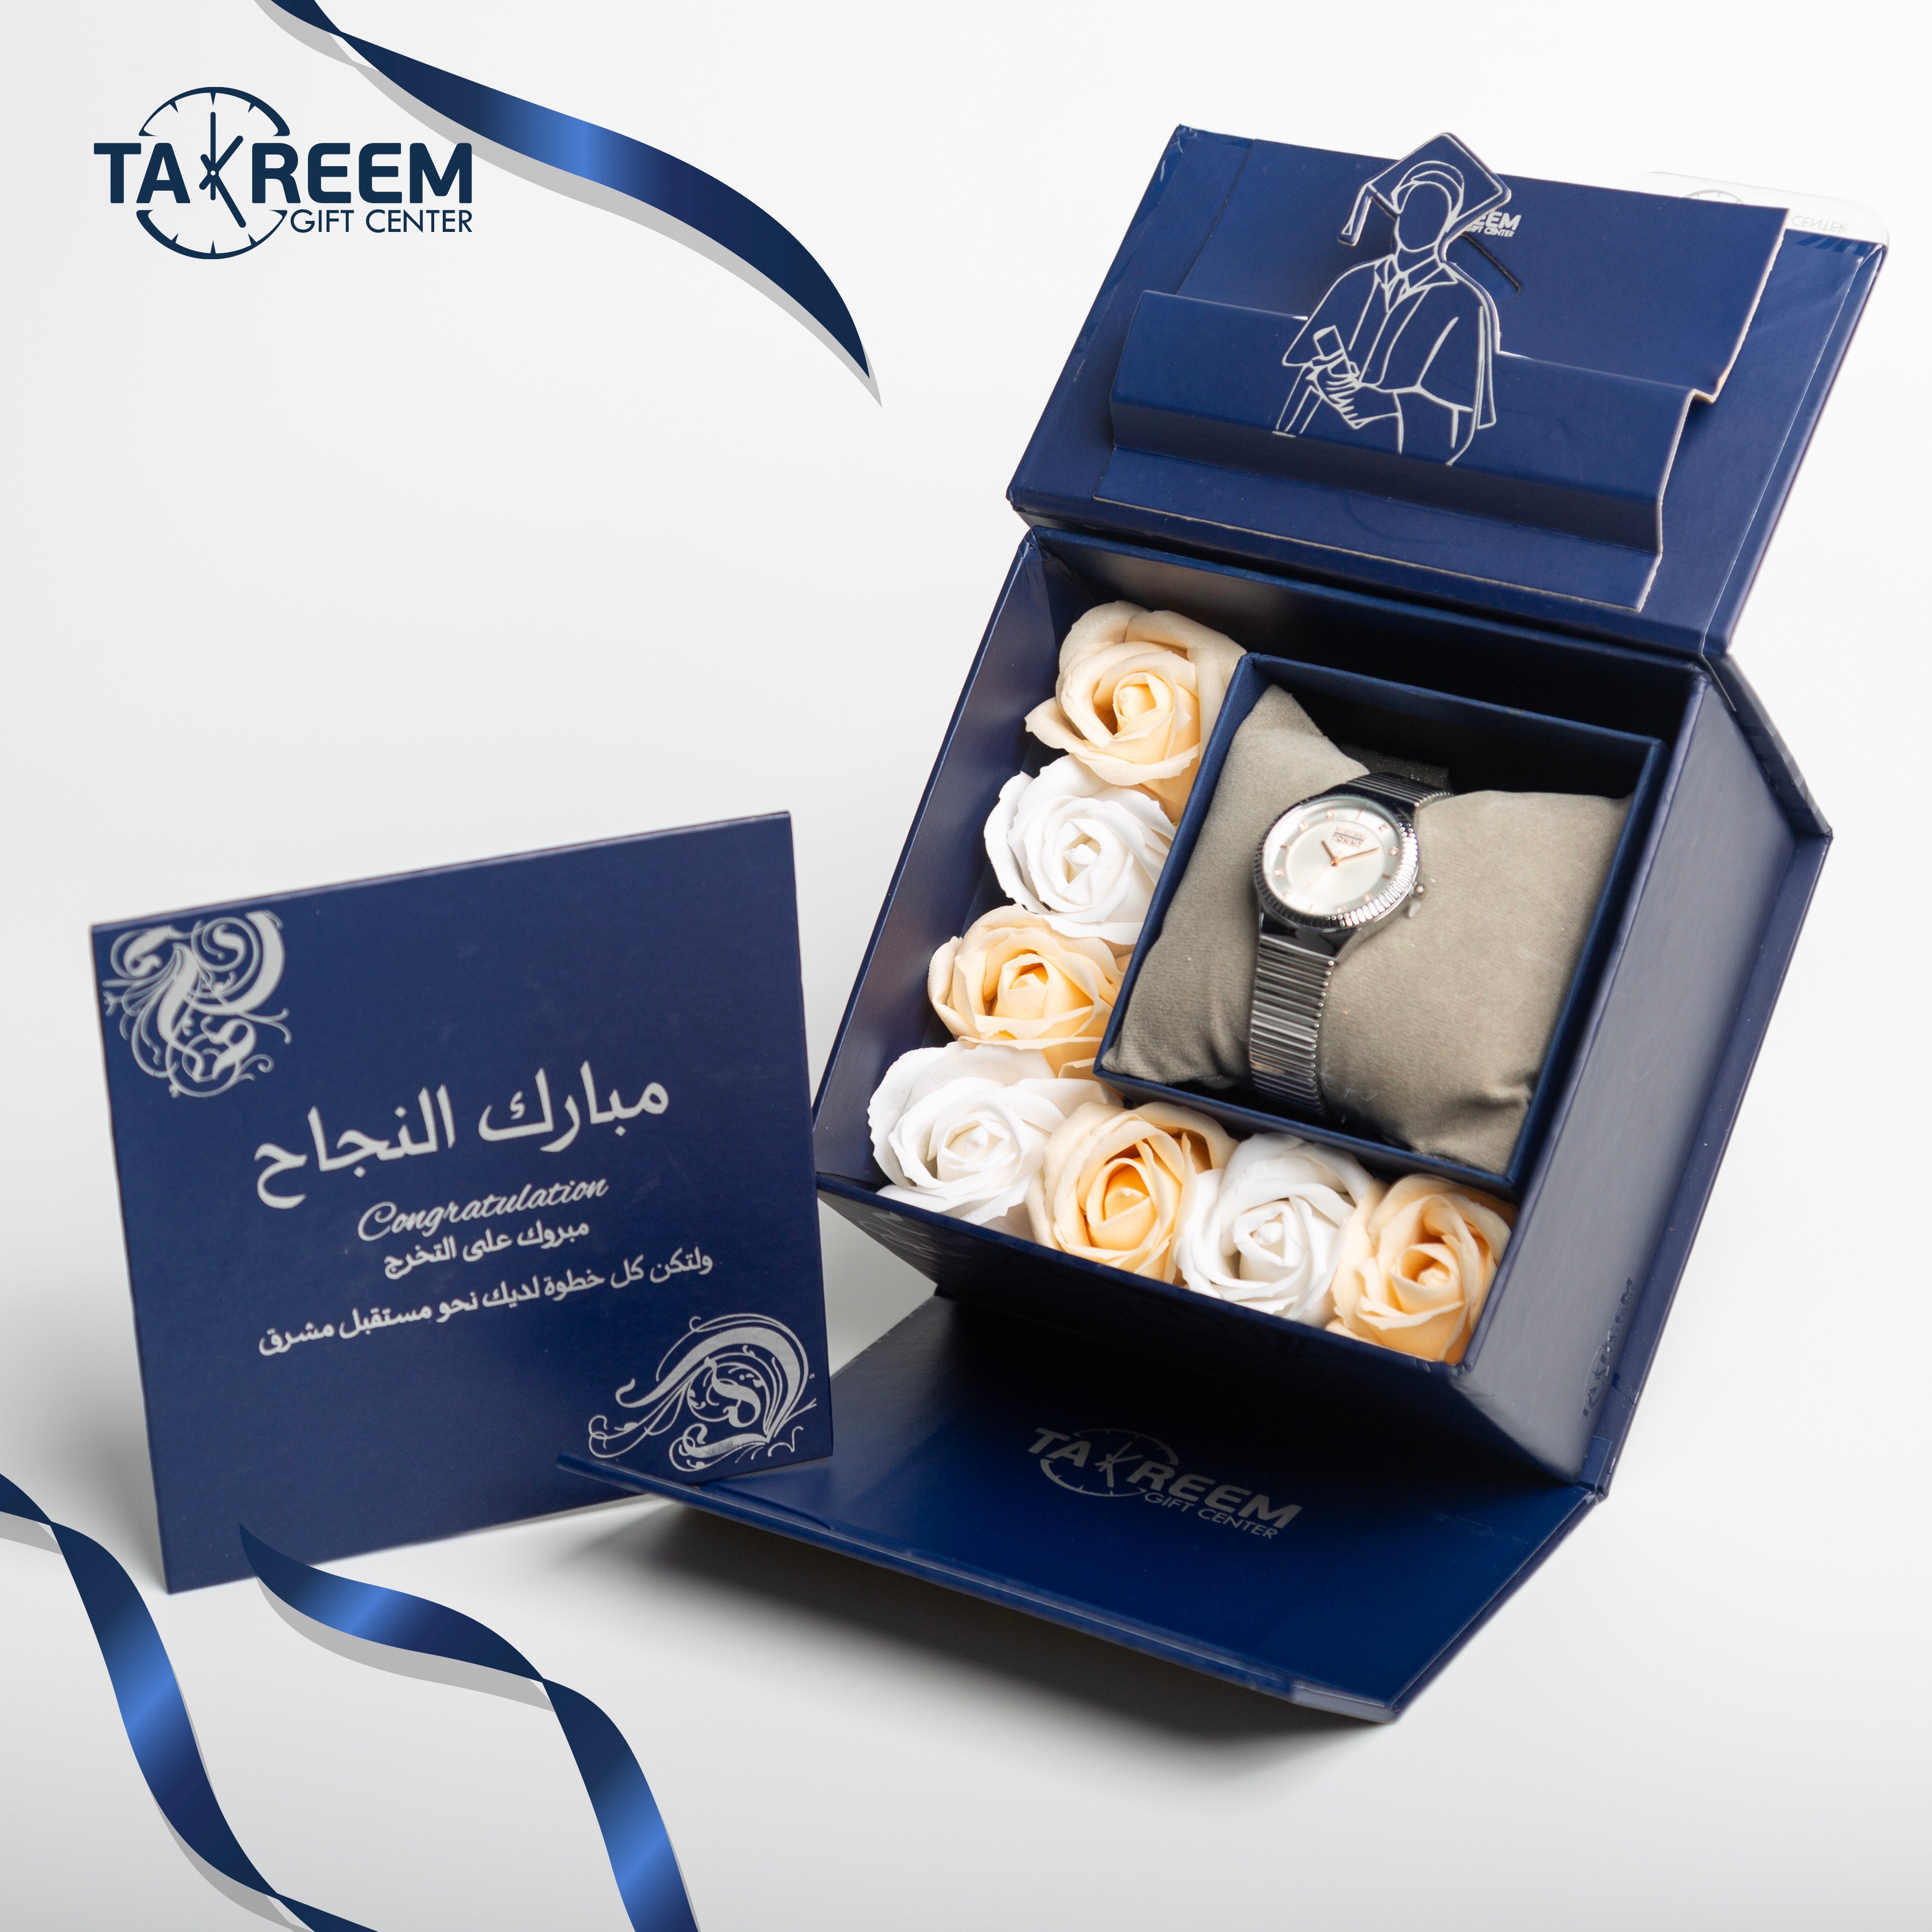 Small Smile12 Gift Boxes  By Takreem Gifts Center